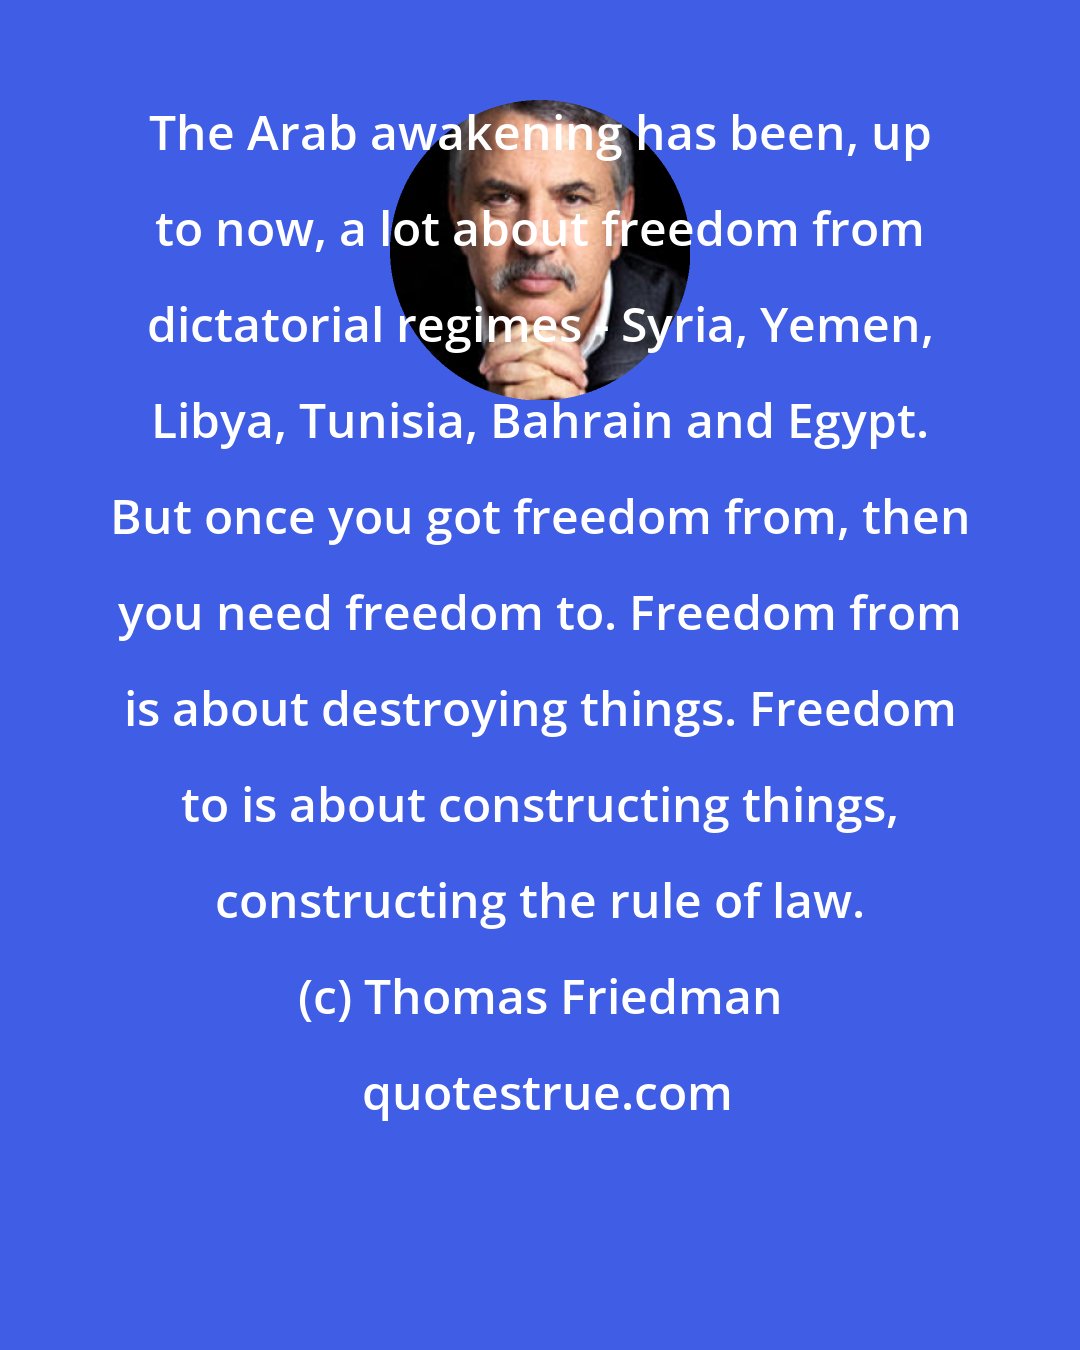 Thomas Friedman: The Arab awakening has been, up to now, a lot about freedom from dictatorial regimes - Syria, Yemen, Libya, Tunisia, Bahrain and Egypt. But once you got freedom from, then you need freedom to. Freedom from is about destroying things. Freedom to is about constructing things, constructing the rule of law.